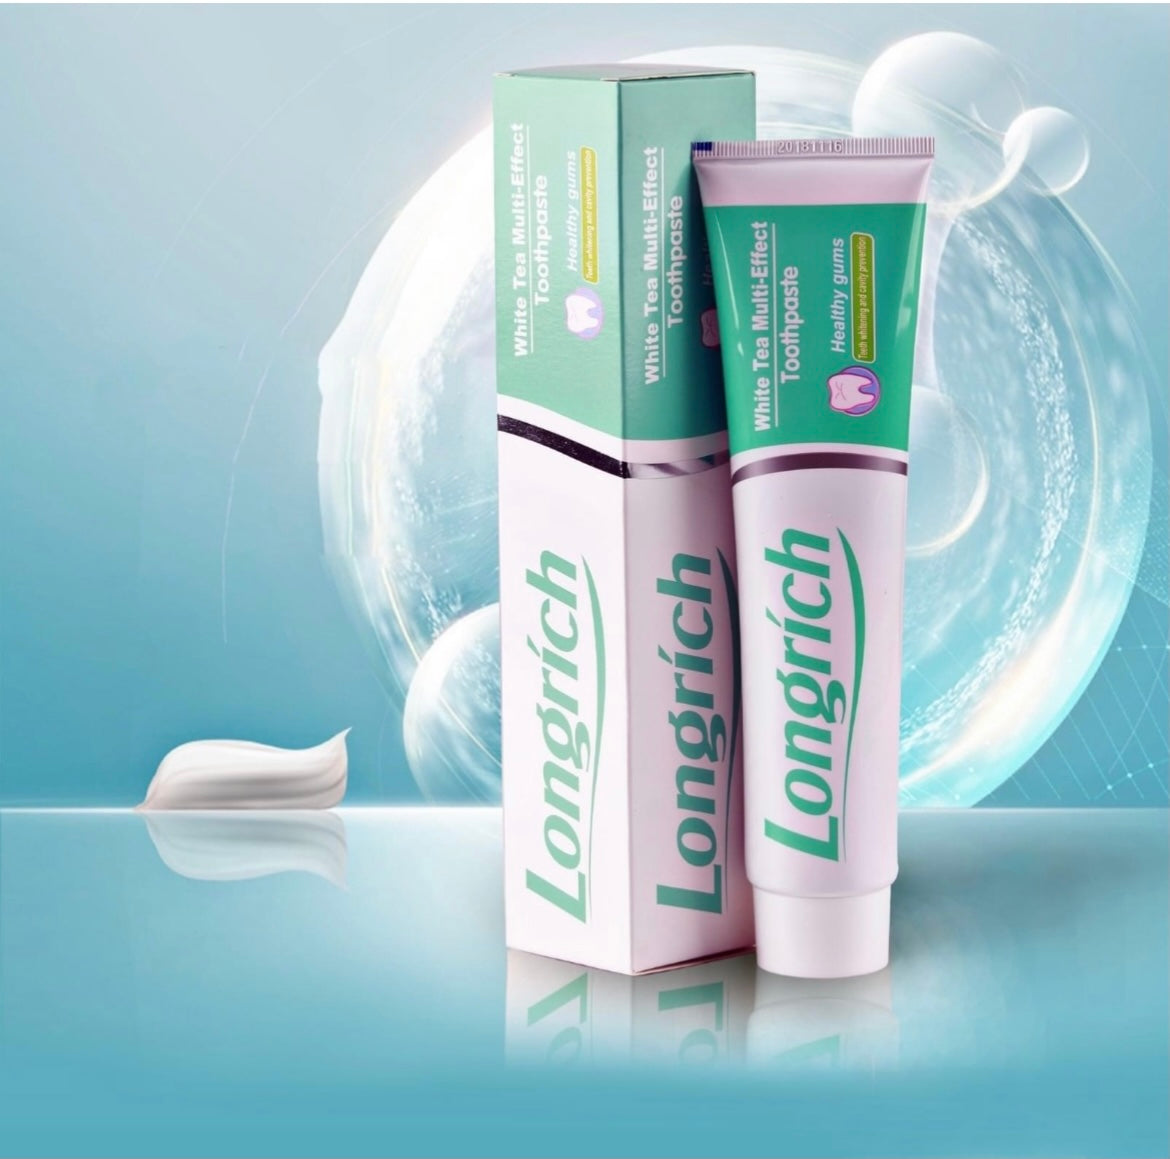 Longrich White Tea Toothpaste (200g) Multi -Effect Deep Cleaning/ Healthy Gum- Fluoride Free